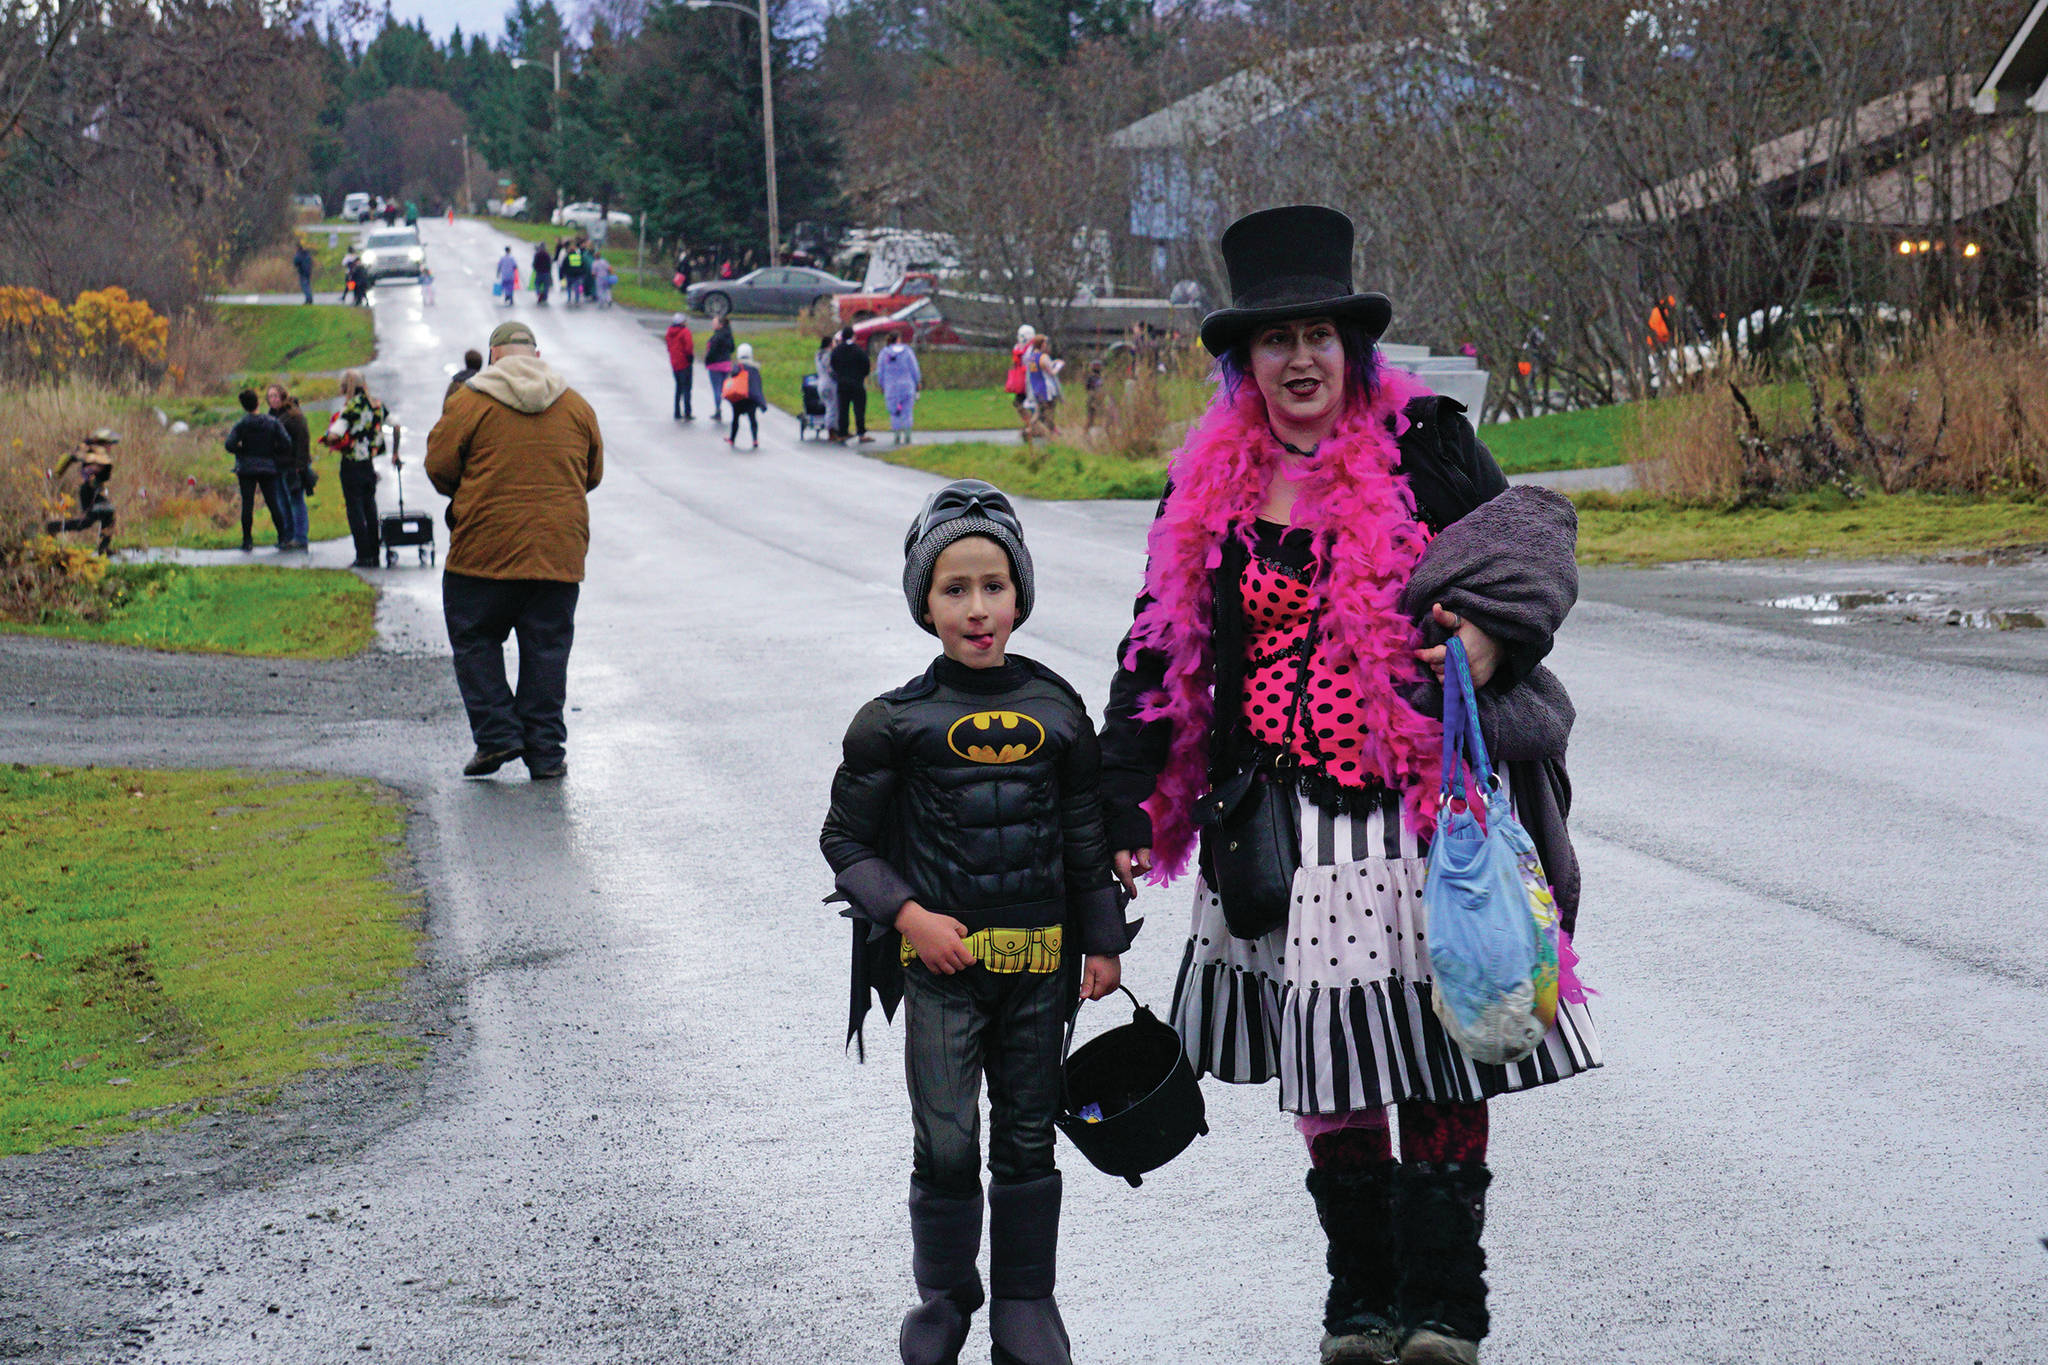 Soren Thomas, left, and his mom, Sage, right, were part of a group of Halloween trick-or-treaters walking down Bayview Avenue, on Oct. 31, 2019, in Homer, Alaska. Bayview Avenue and Mountainview Avenue were one-way for the night to minimize traffic. (Photo by Michael Armstrong/Homer News)